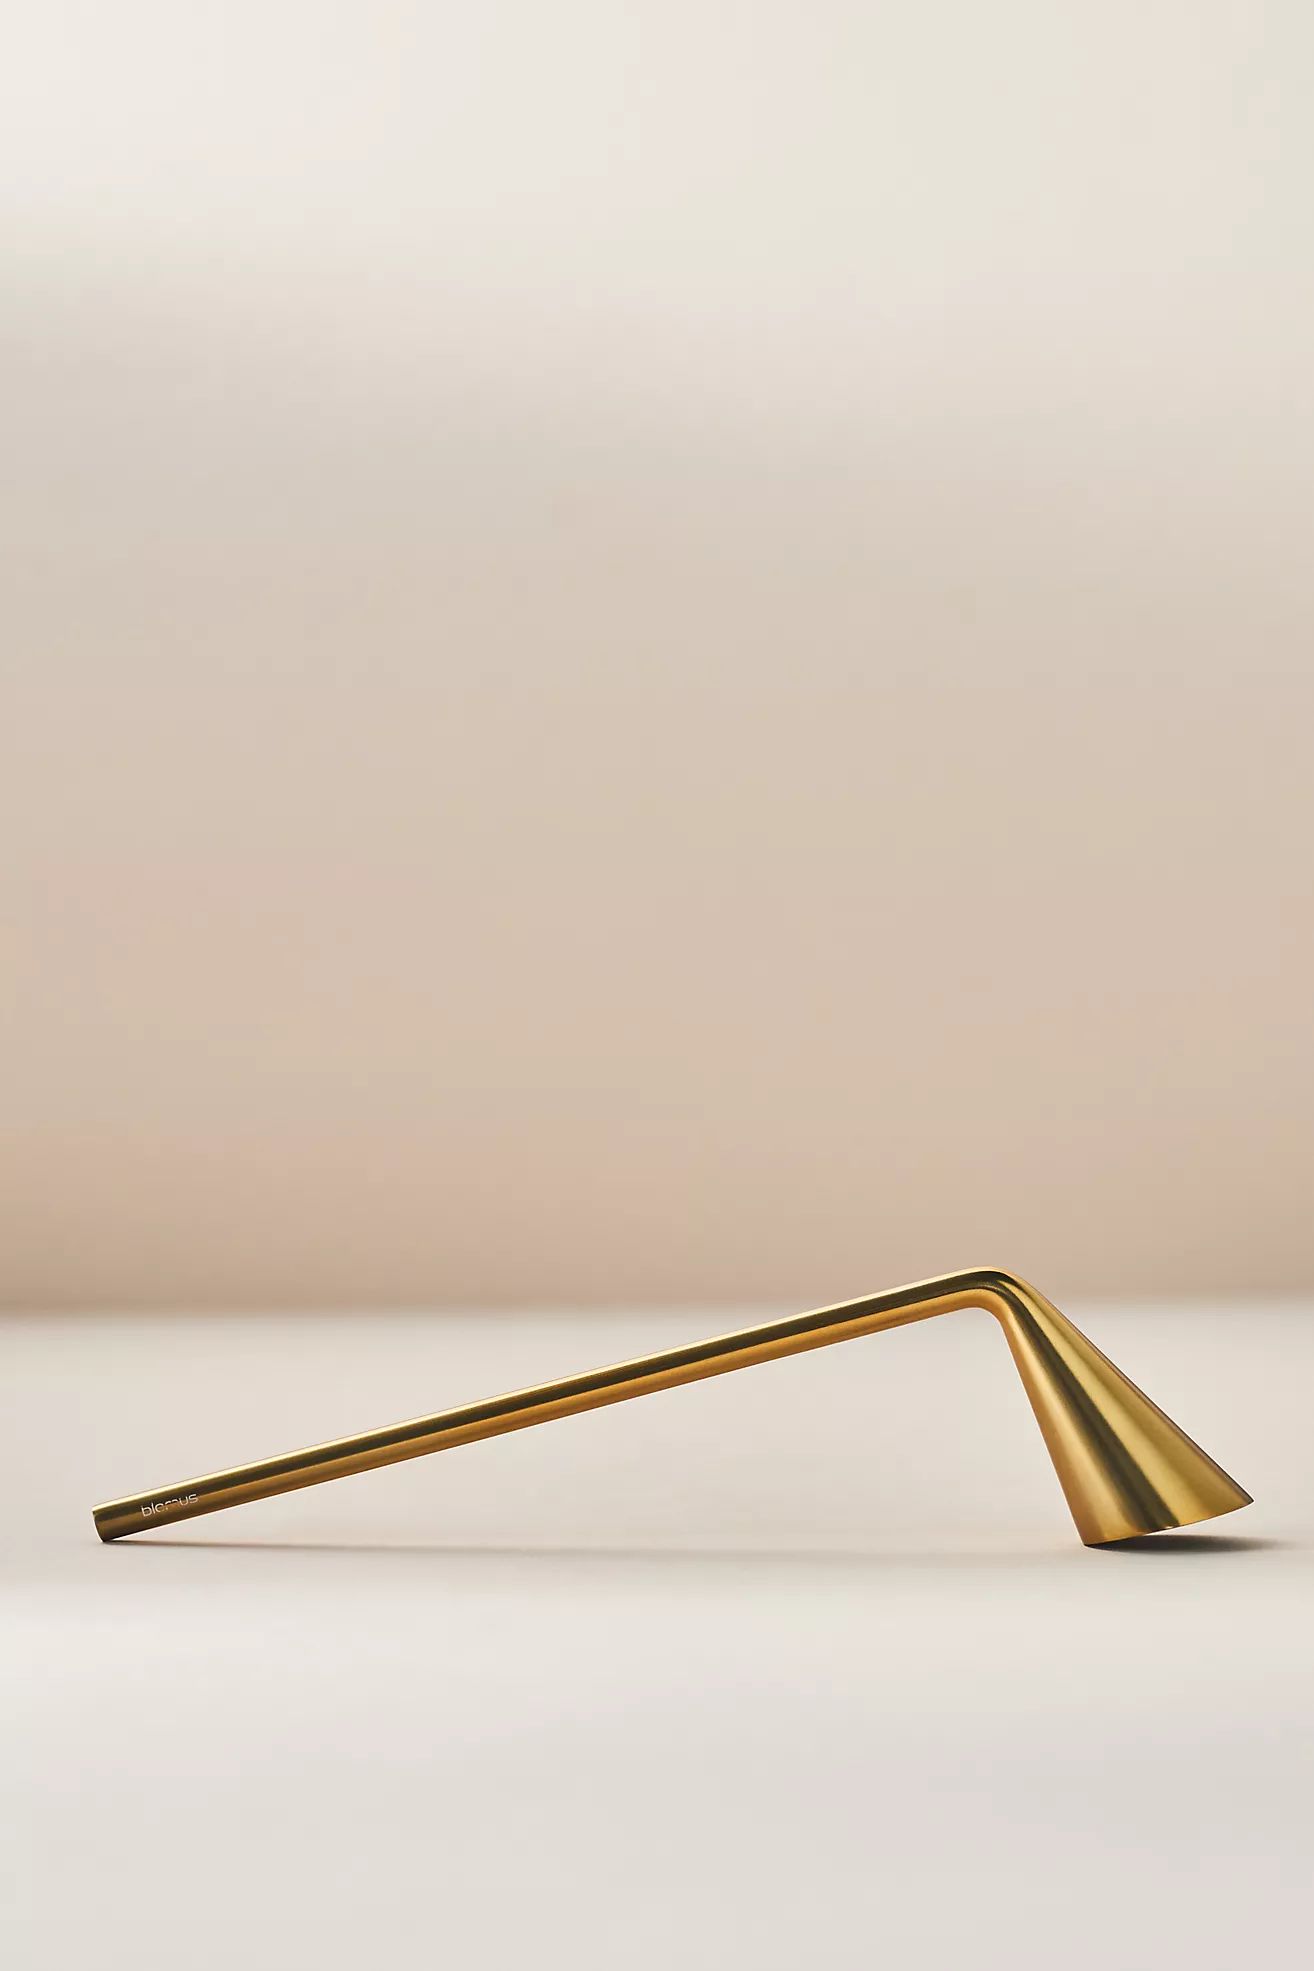 Blomus Gold Candle Snuffer | Anthropologie (US)